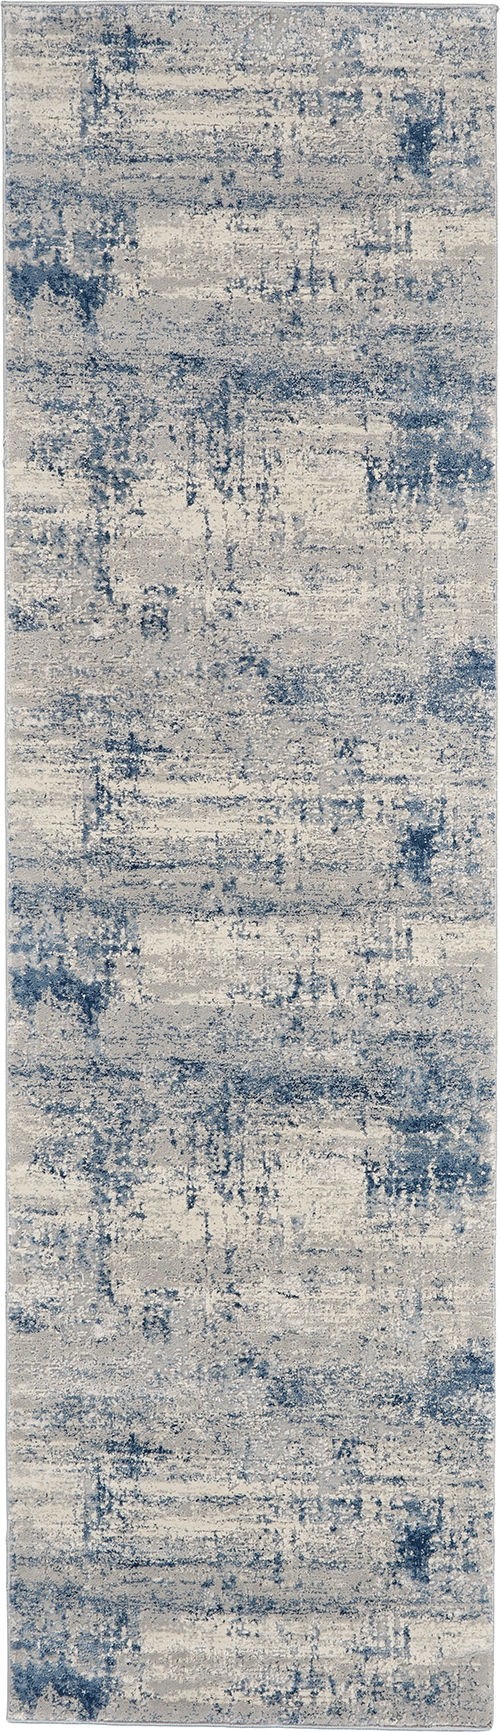 Nourison Rugs - Rustic Textures Runner RUS10 Rug in Ivory / Blue - 2.3m x 0.66m